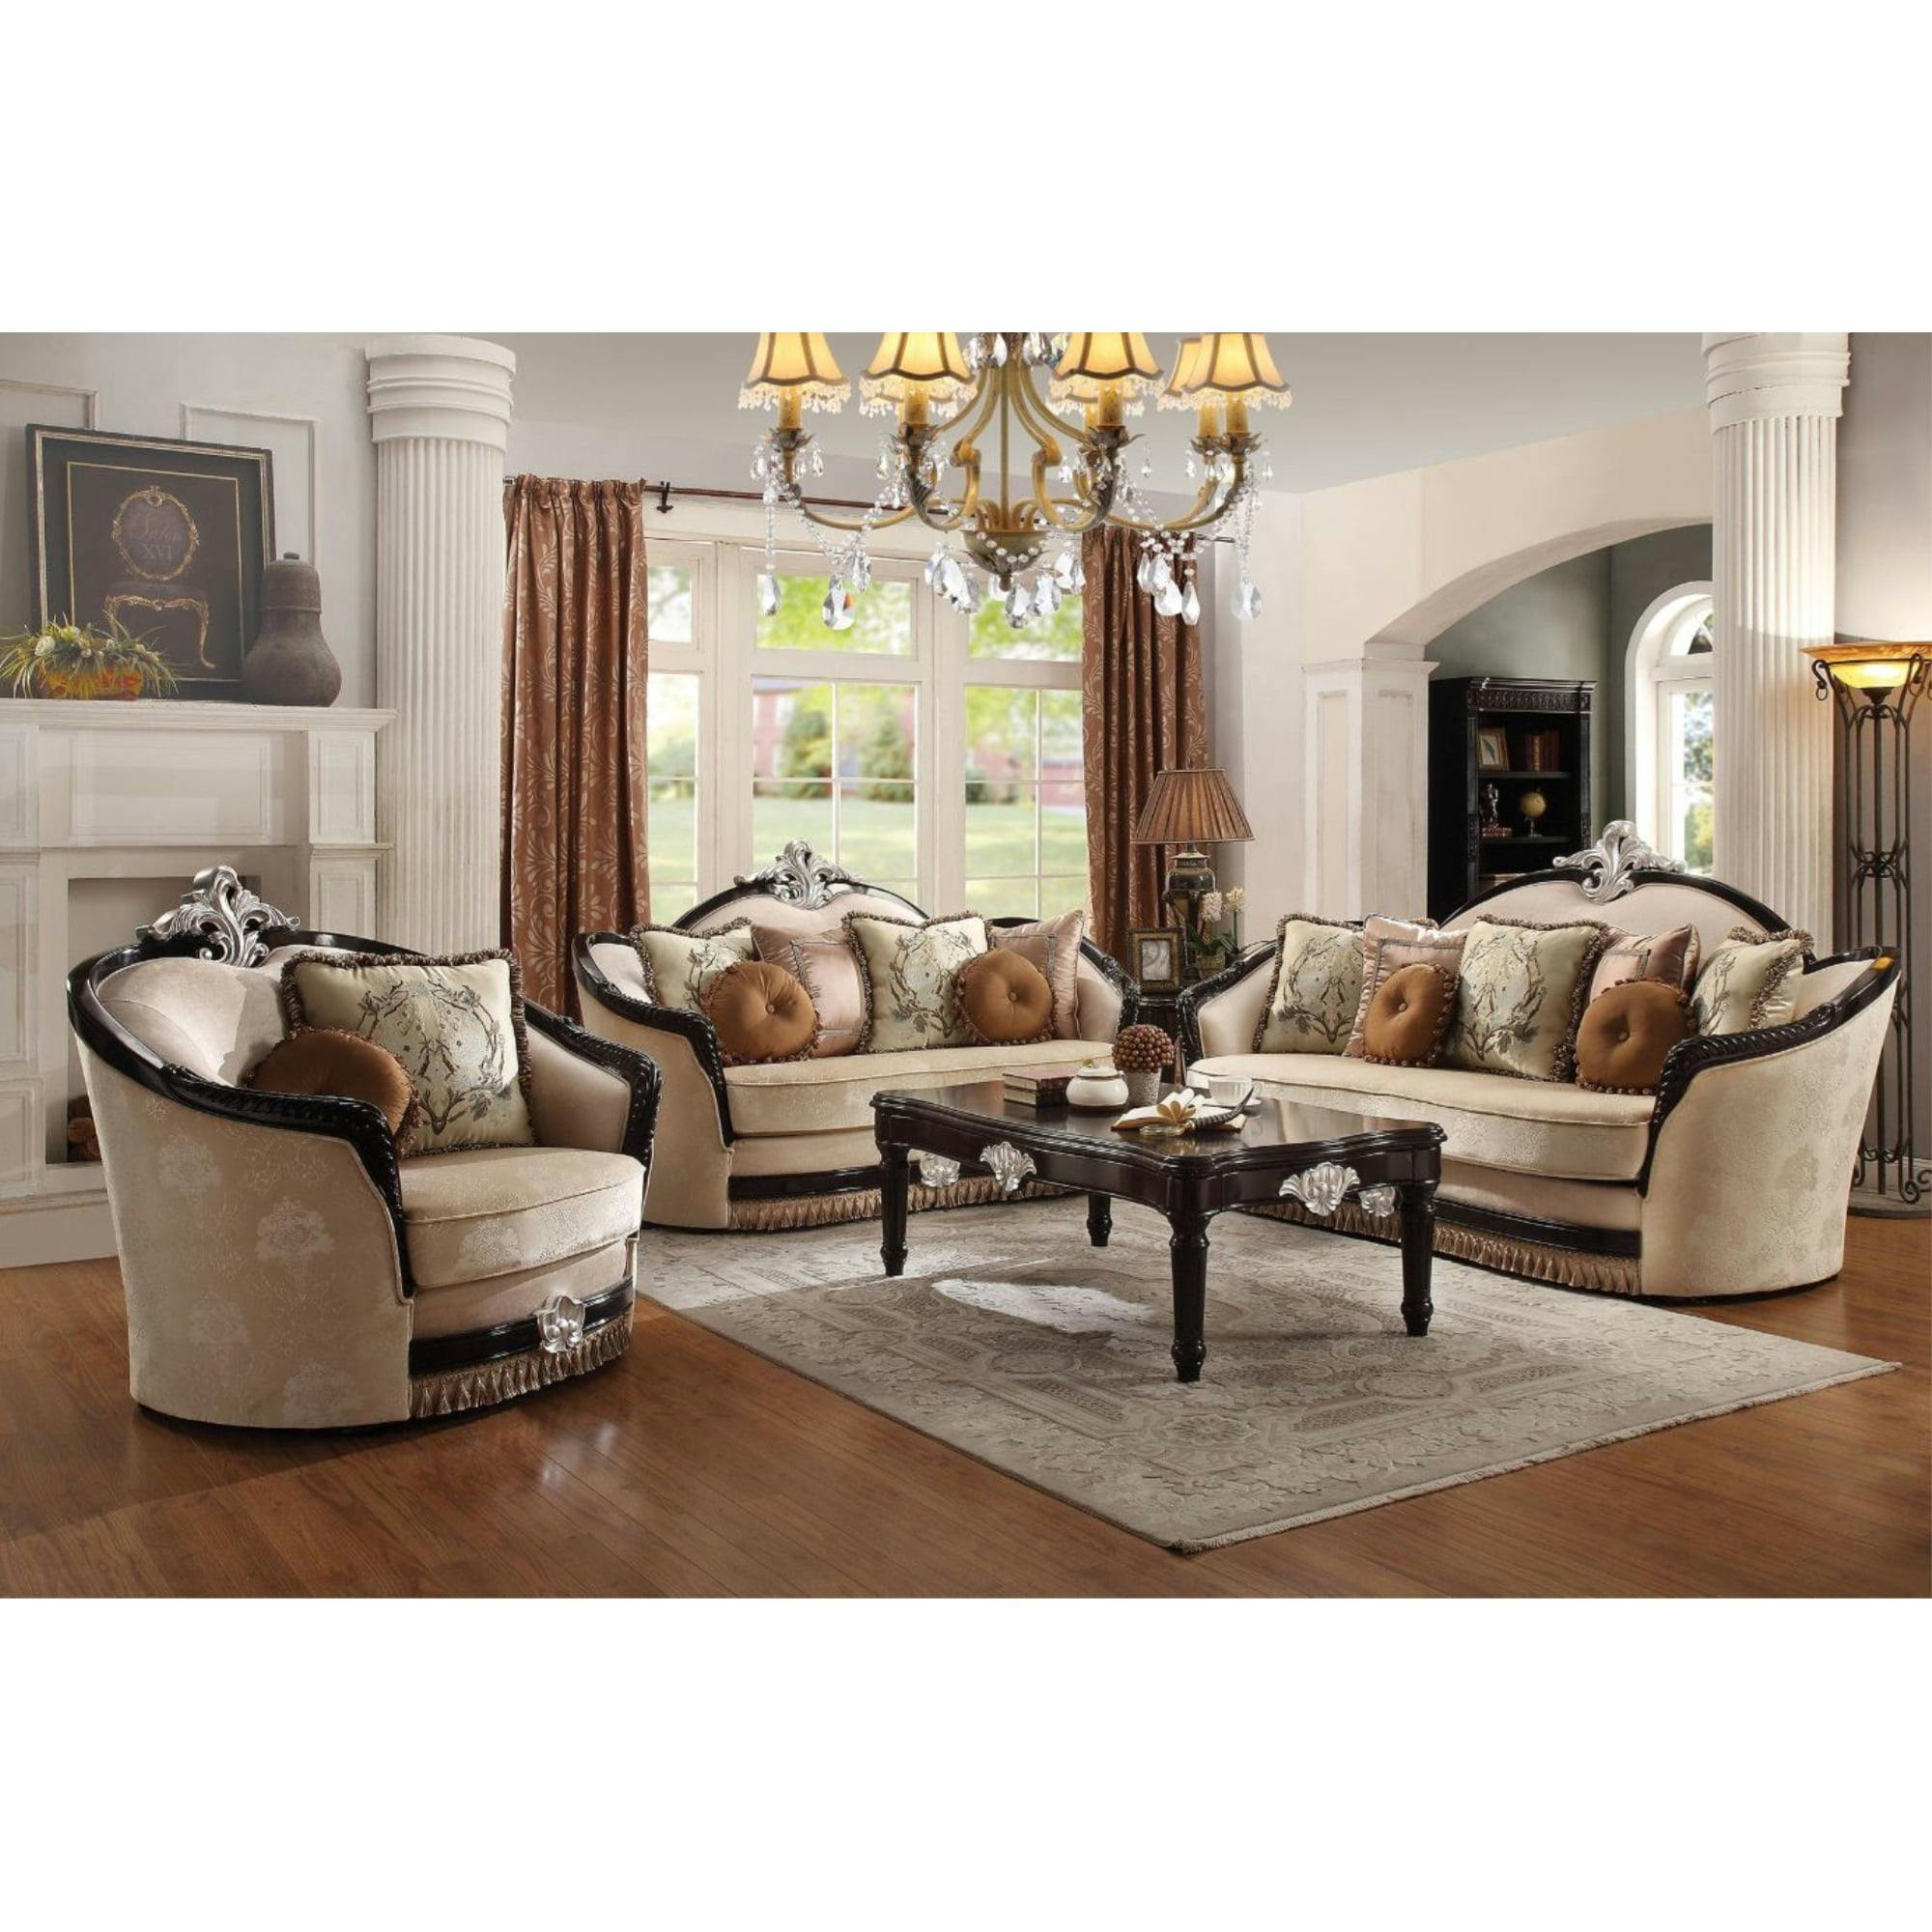 Elegant Traditional Black and Tan Fabric Sofa with Wooden Accents